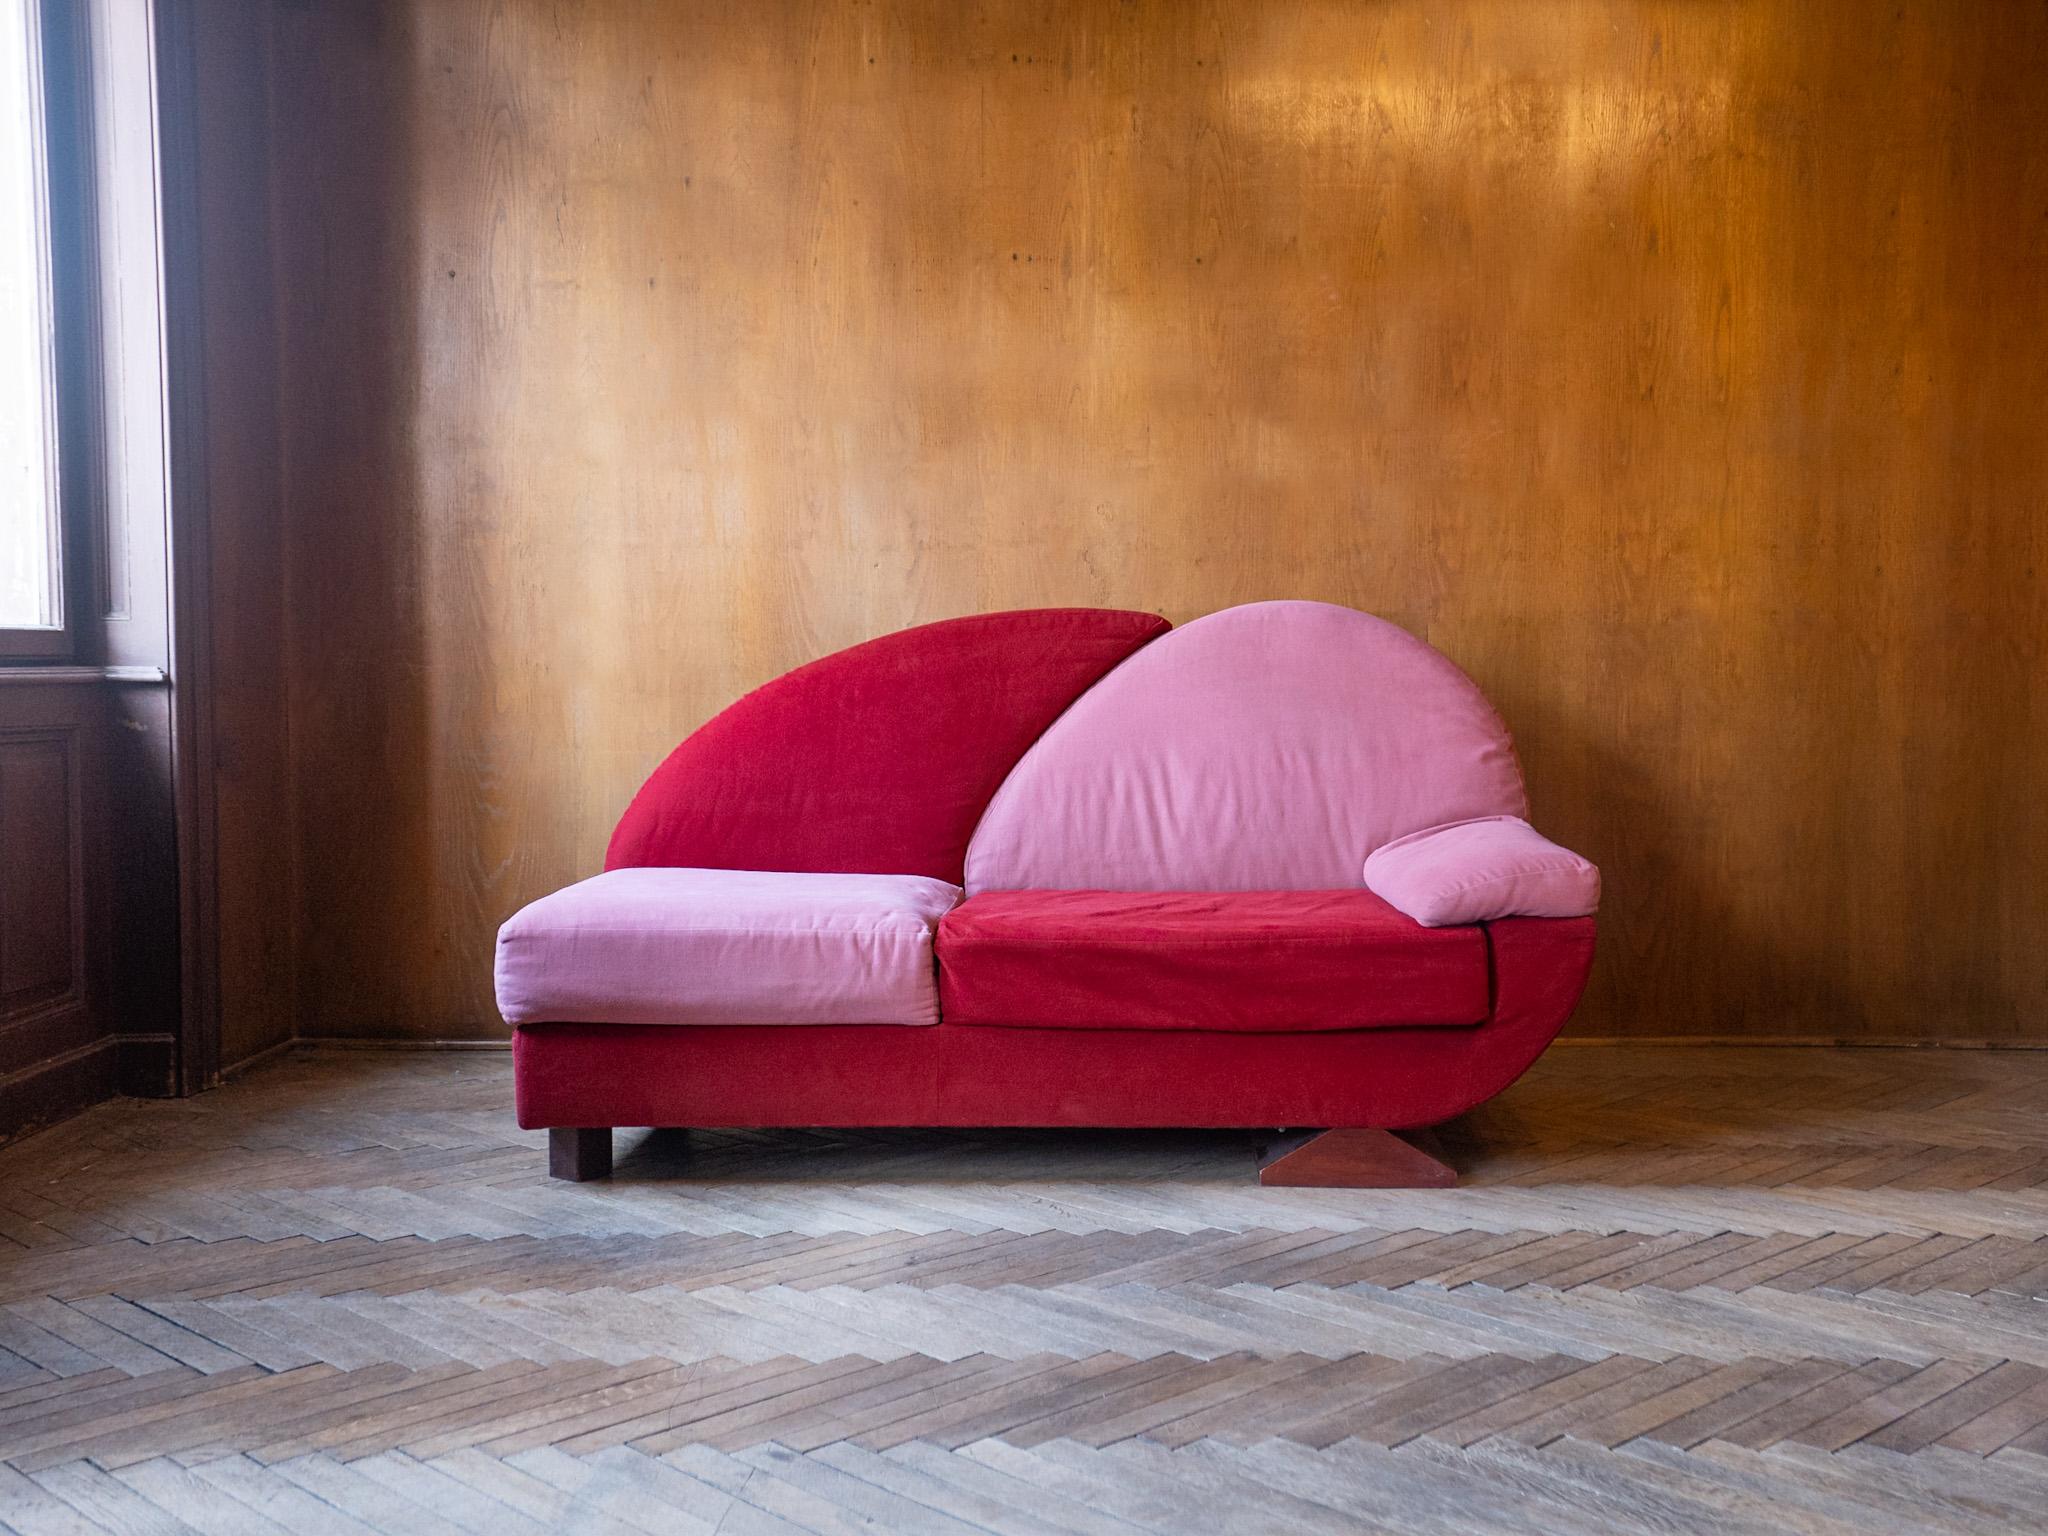 Italian Post-Modern Pink and Red Alcantara Sofas, Italy, 1980s For Sale